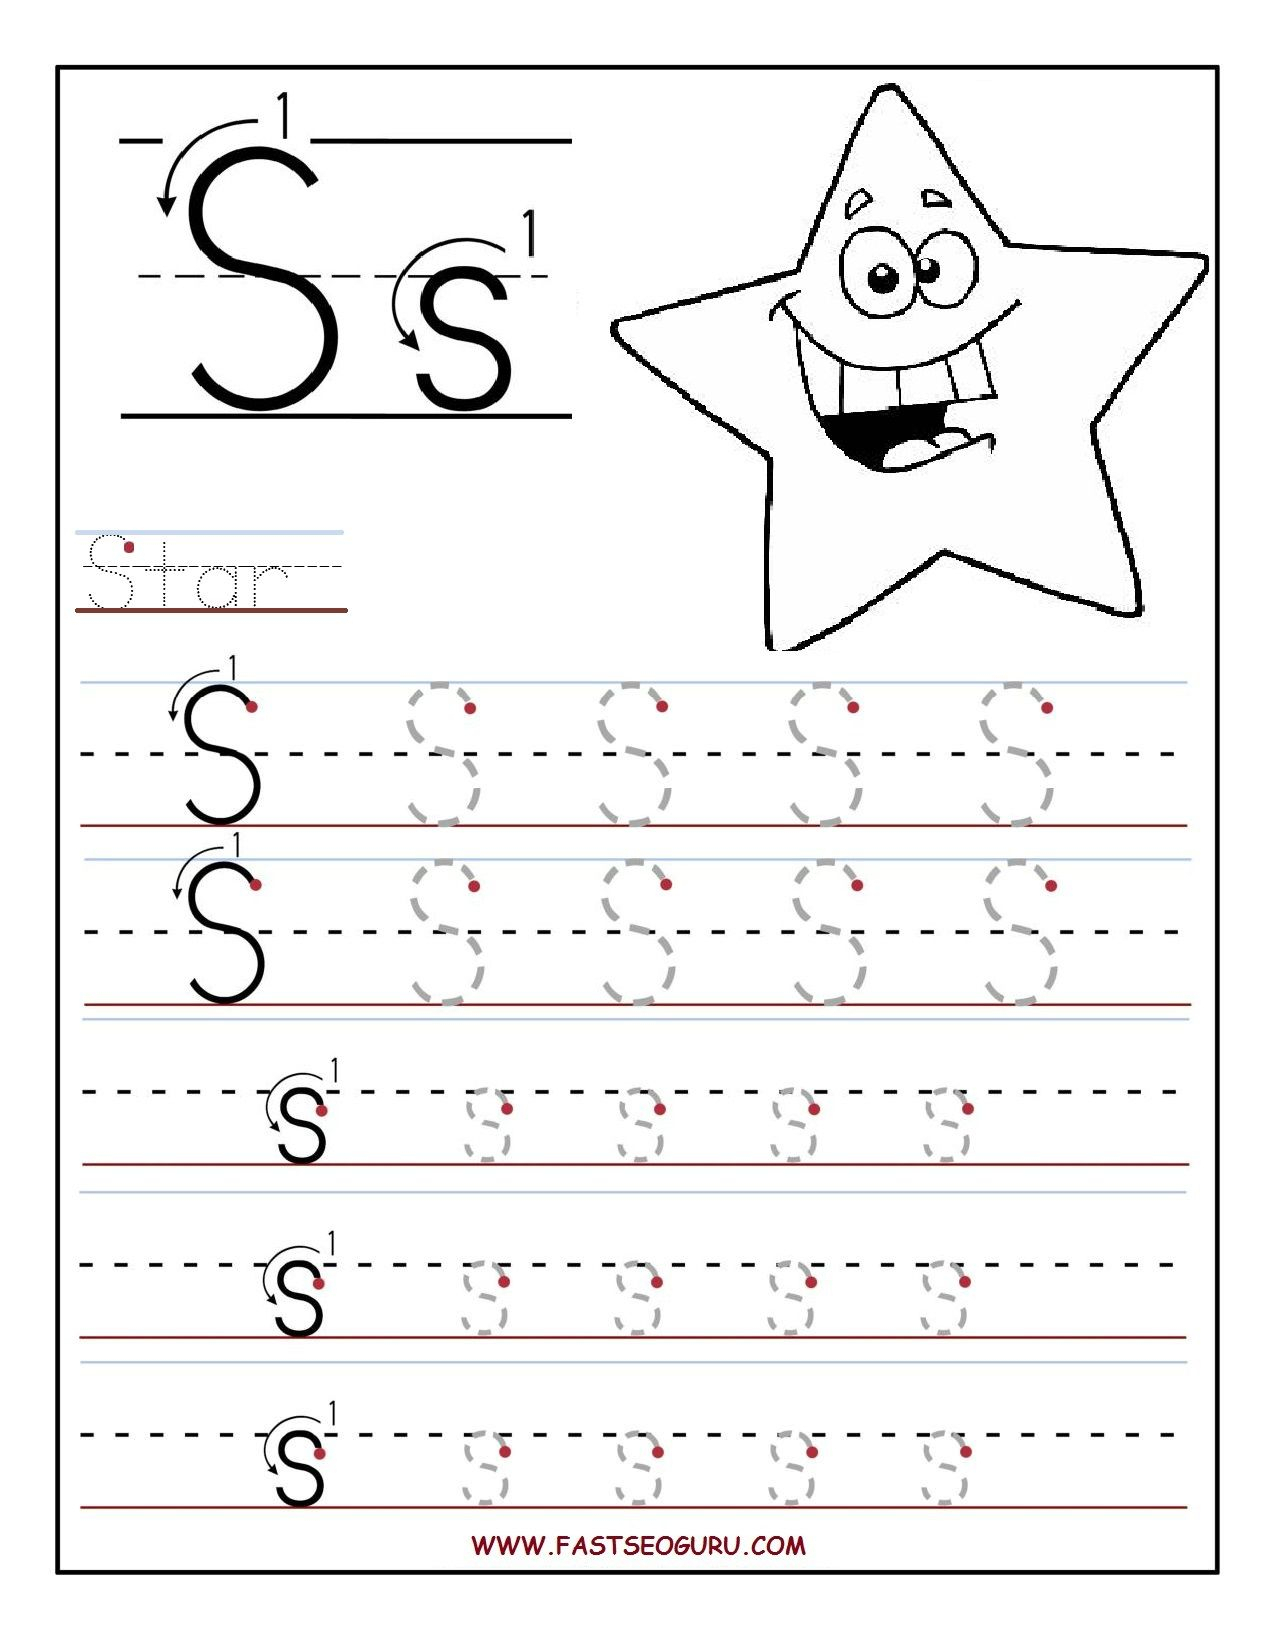 Printable Cursive Alphabet Worksheets Abitlikethis for Tracing Letters S